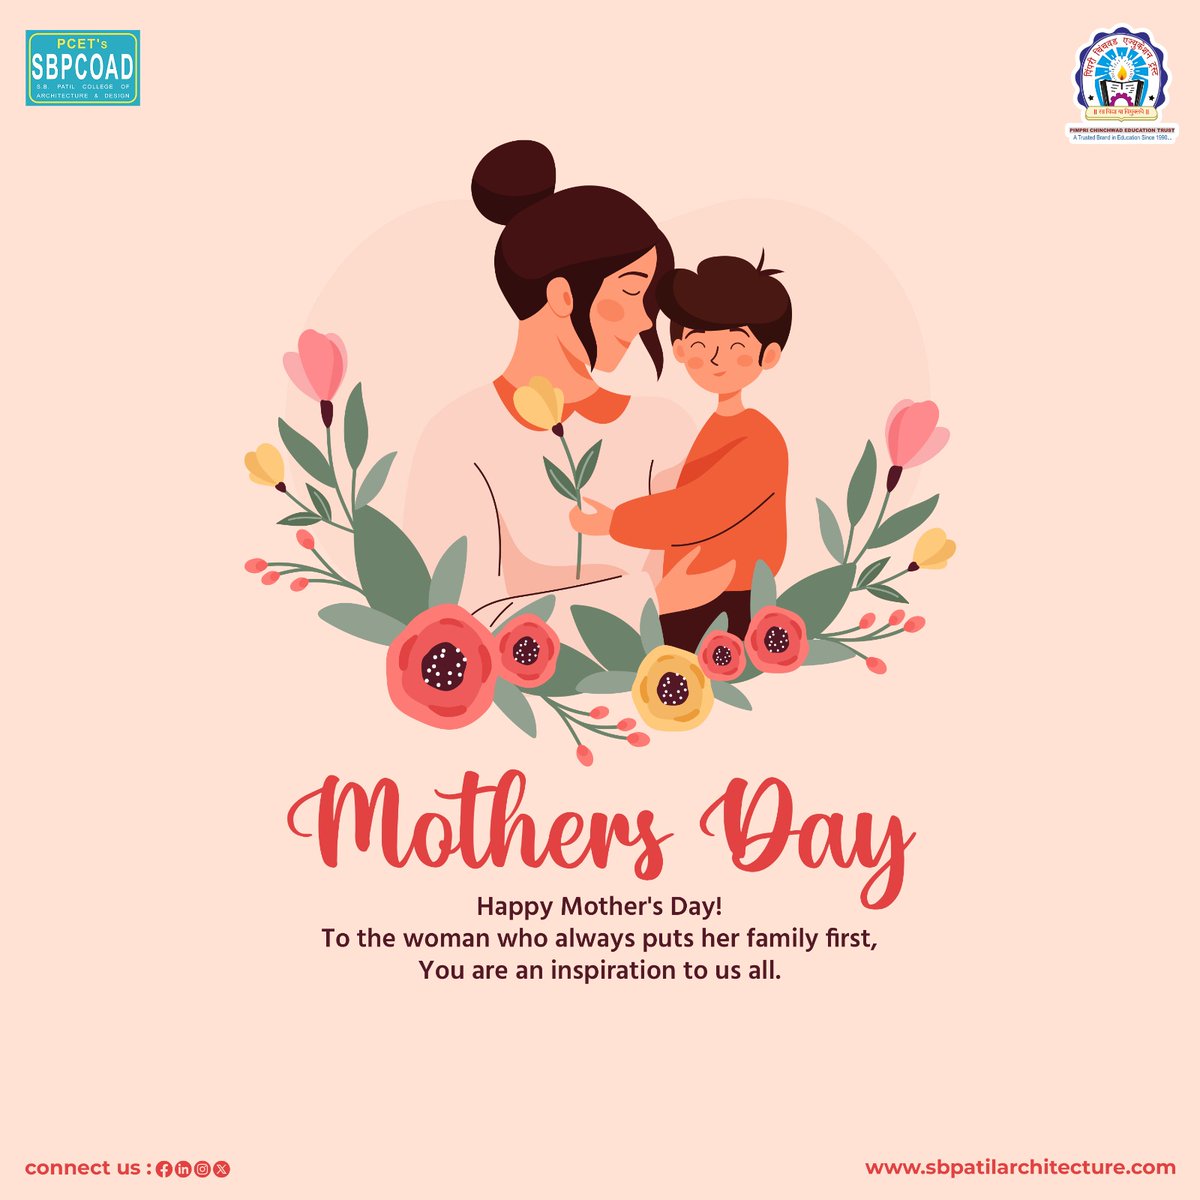 🤱✨Happy Mother's Day to all the incredible moms out there! Today, we celebrate boundless love, strength, & wisdom that mothers embody. Let's cherish & honor them not just today, but every day, for their endless sacrifices and unwavering support.🎉 #HappyMothersDay #मातृदिन